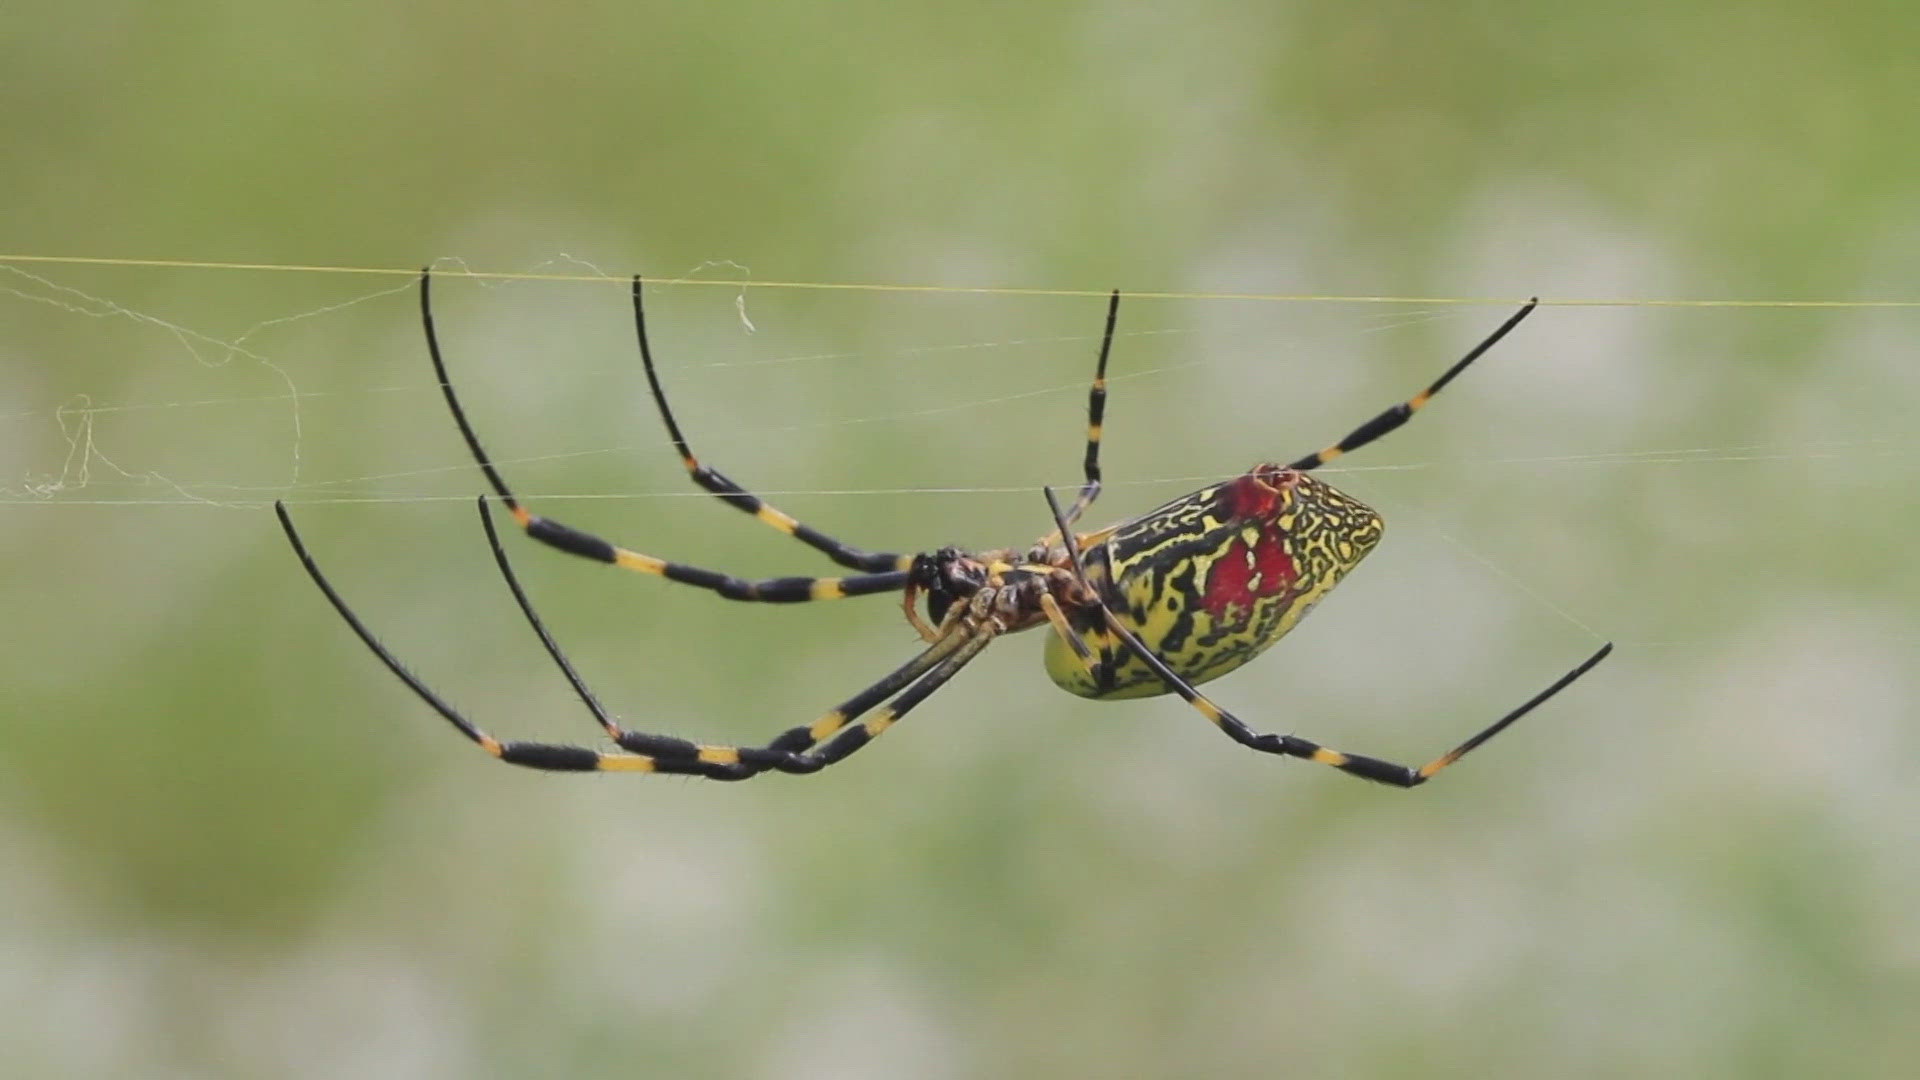 Have you seen headlines about flying, venomous Joro spiders invading the East Coast this summer? Here’s why you shouldn’t worry.